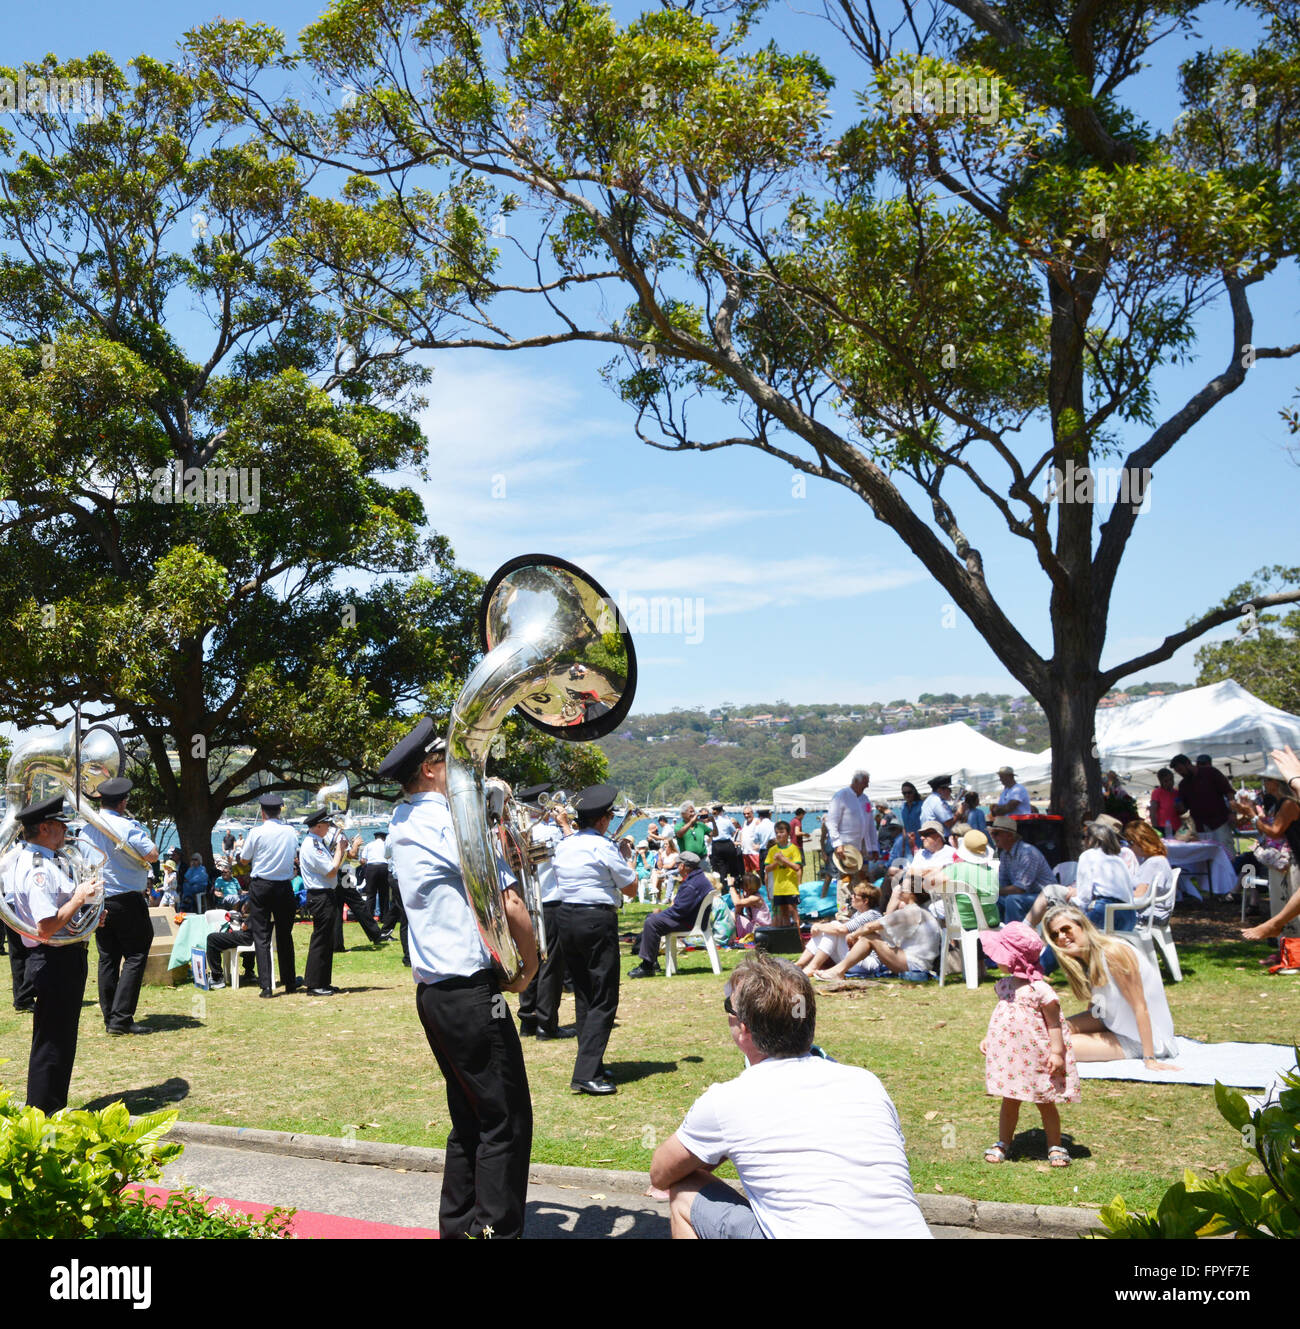 NSW Fire & Rescue Band on Sydney Beach, Sydney Australia. People enjoying a day out on the beach with the band playing. Stock Photo